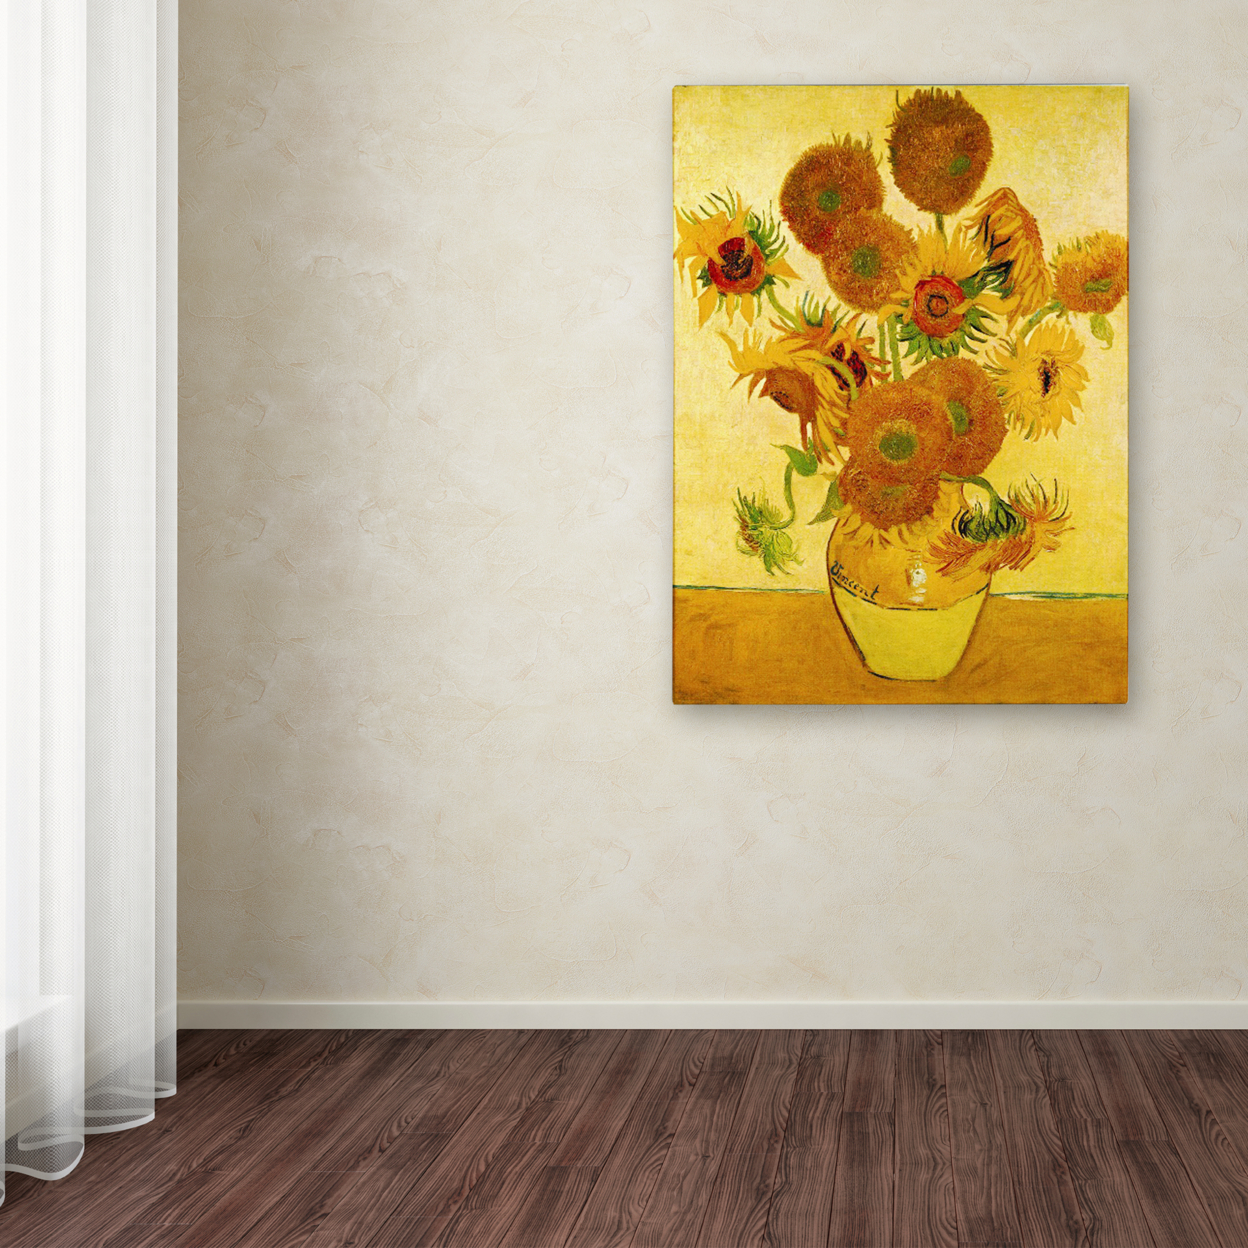 Vase With Sunflowers By Vincent Van Gogh Canvas Wall Art 35 X 47